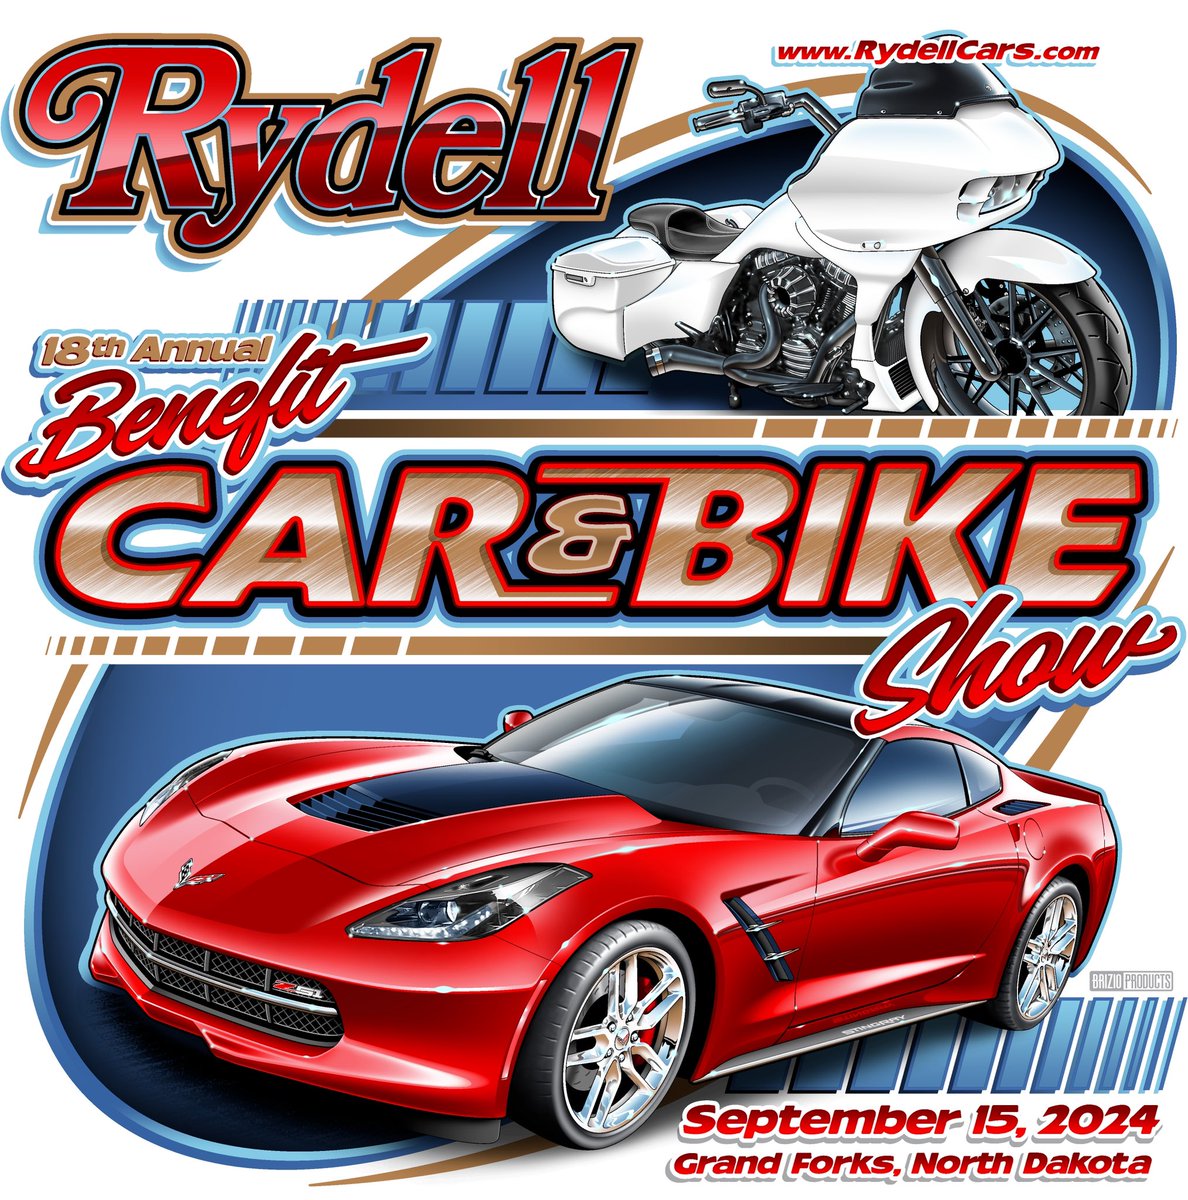 Mark your Calendar’s for Sunday, September 15th, for the 18th Annual Rydell Charity Benefit Car and Bike Show!